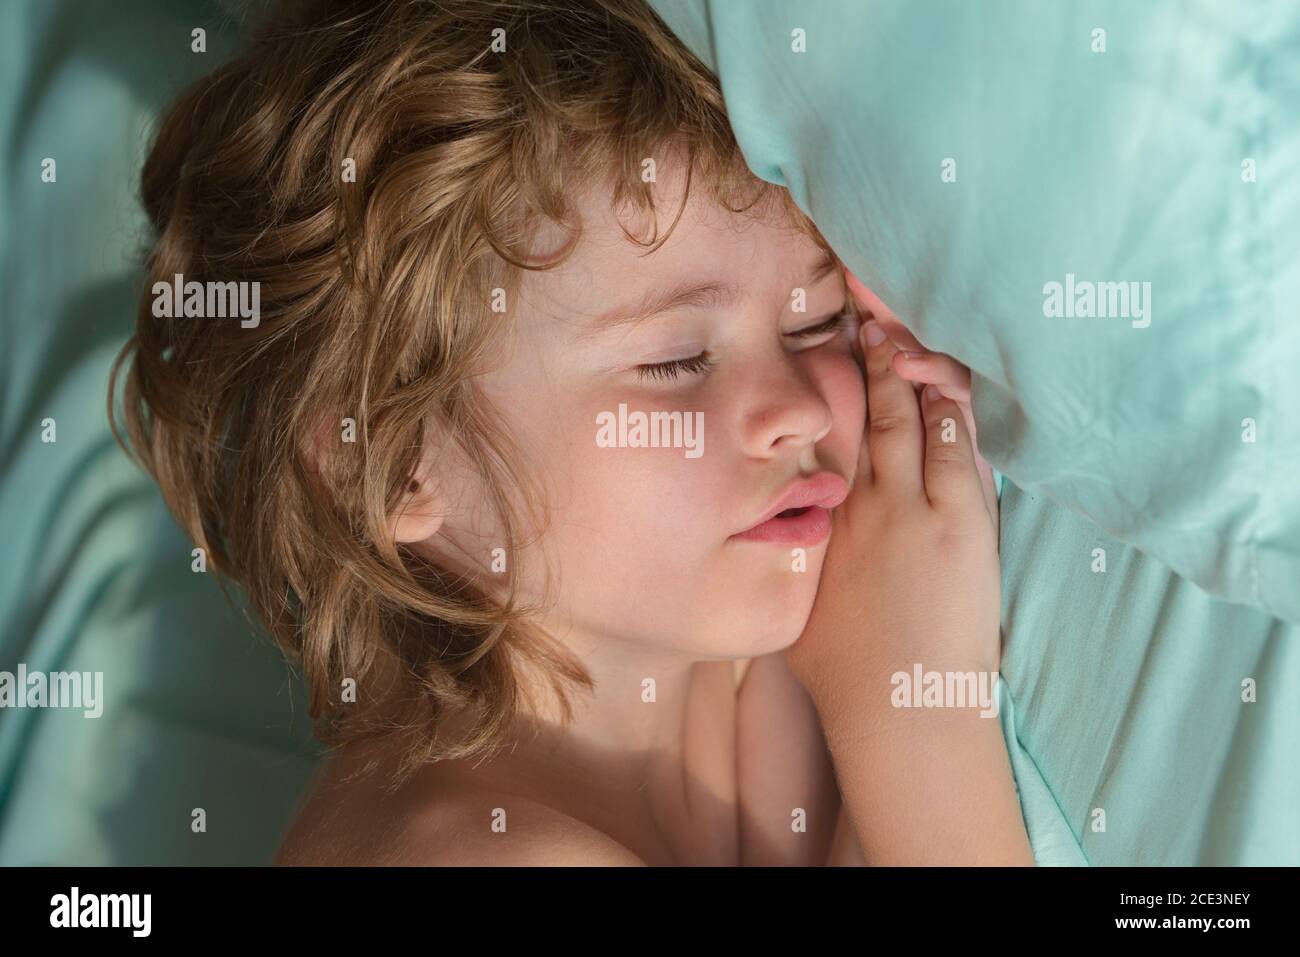 Little kids sleeping with her mouth open, snoring, kids sleeps in bed Stock Photo